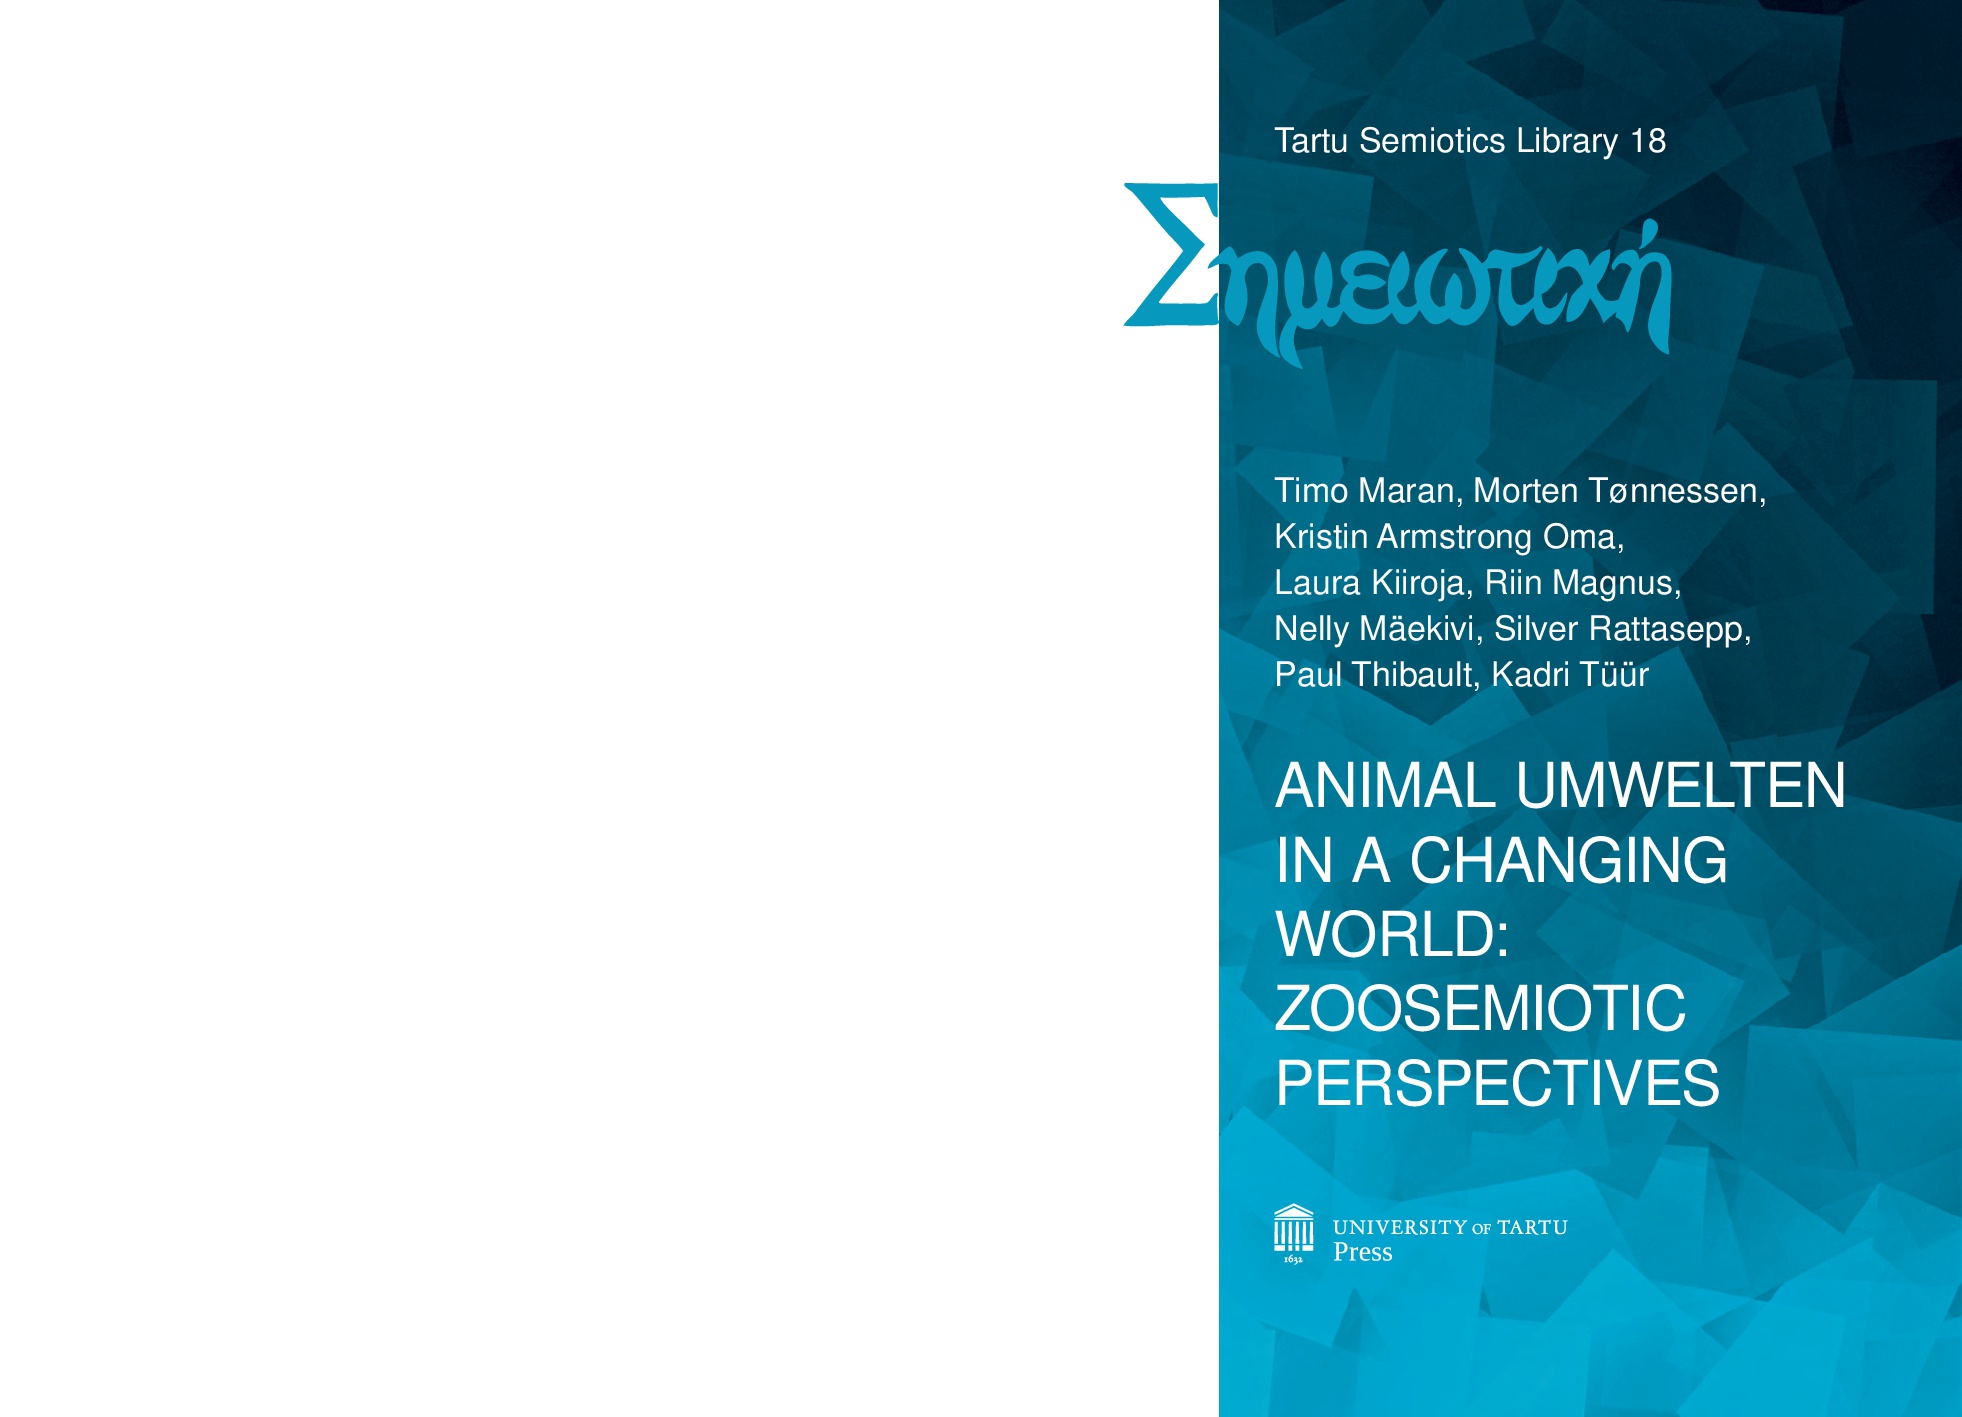 Human perceptions of animals: a multimodal event analysis of interview data